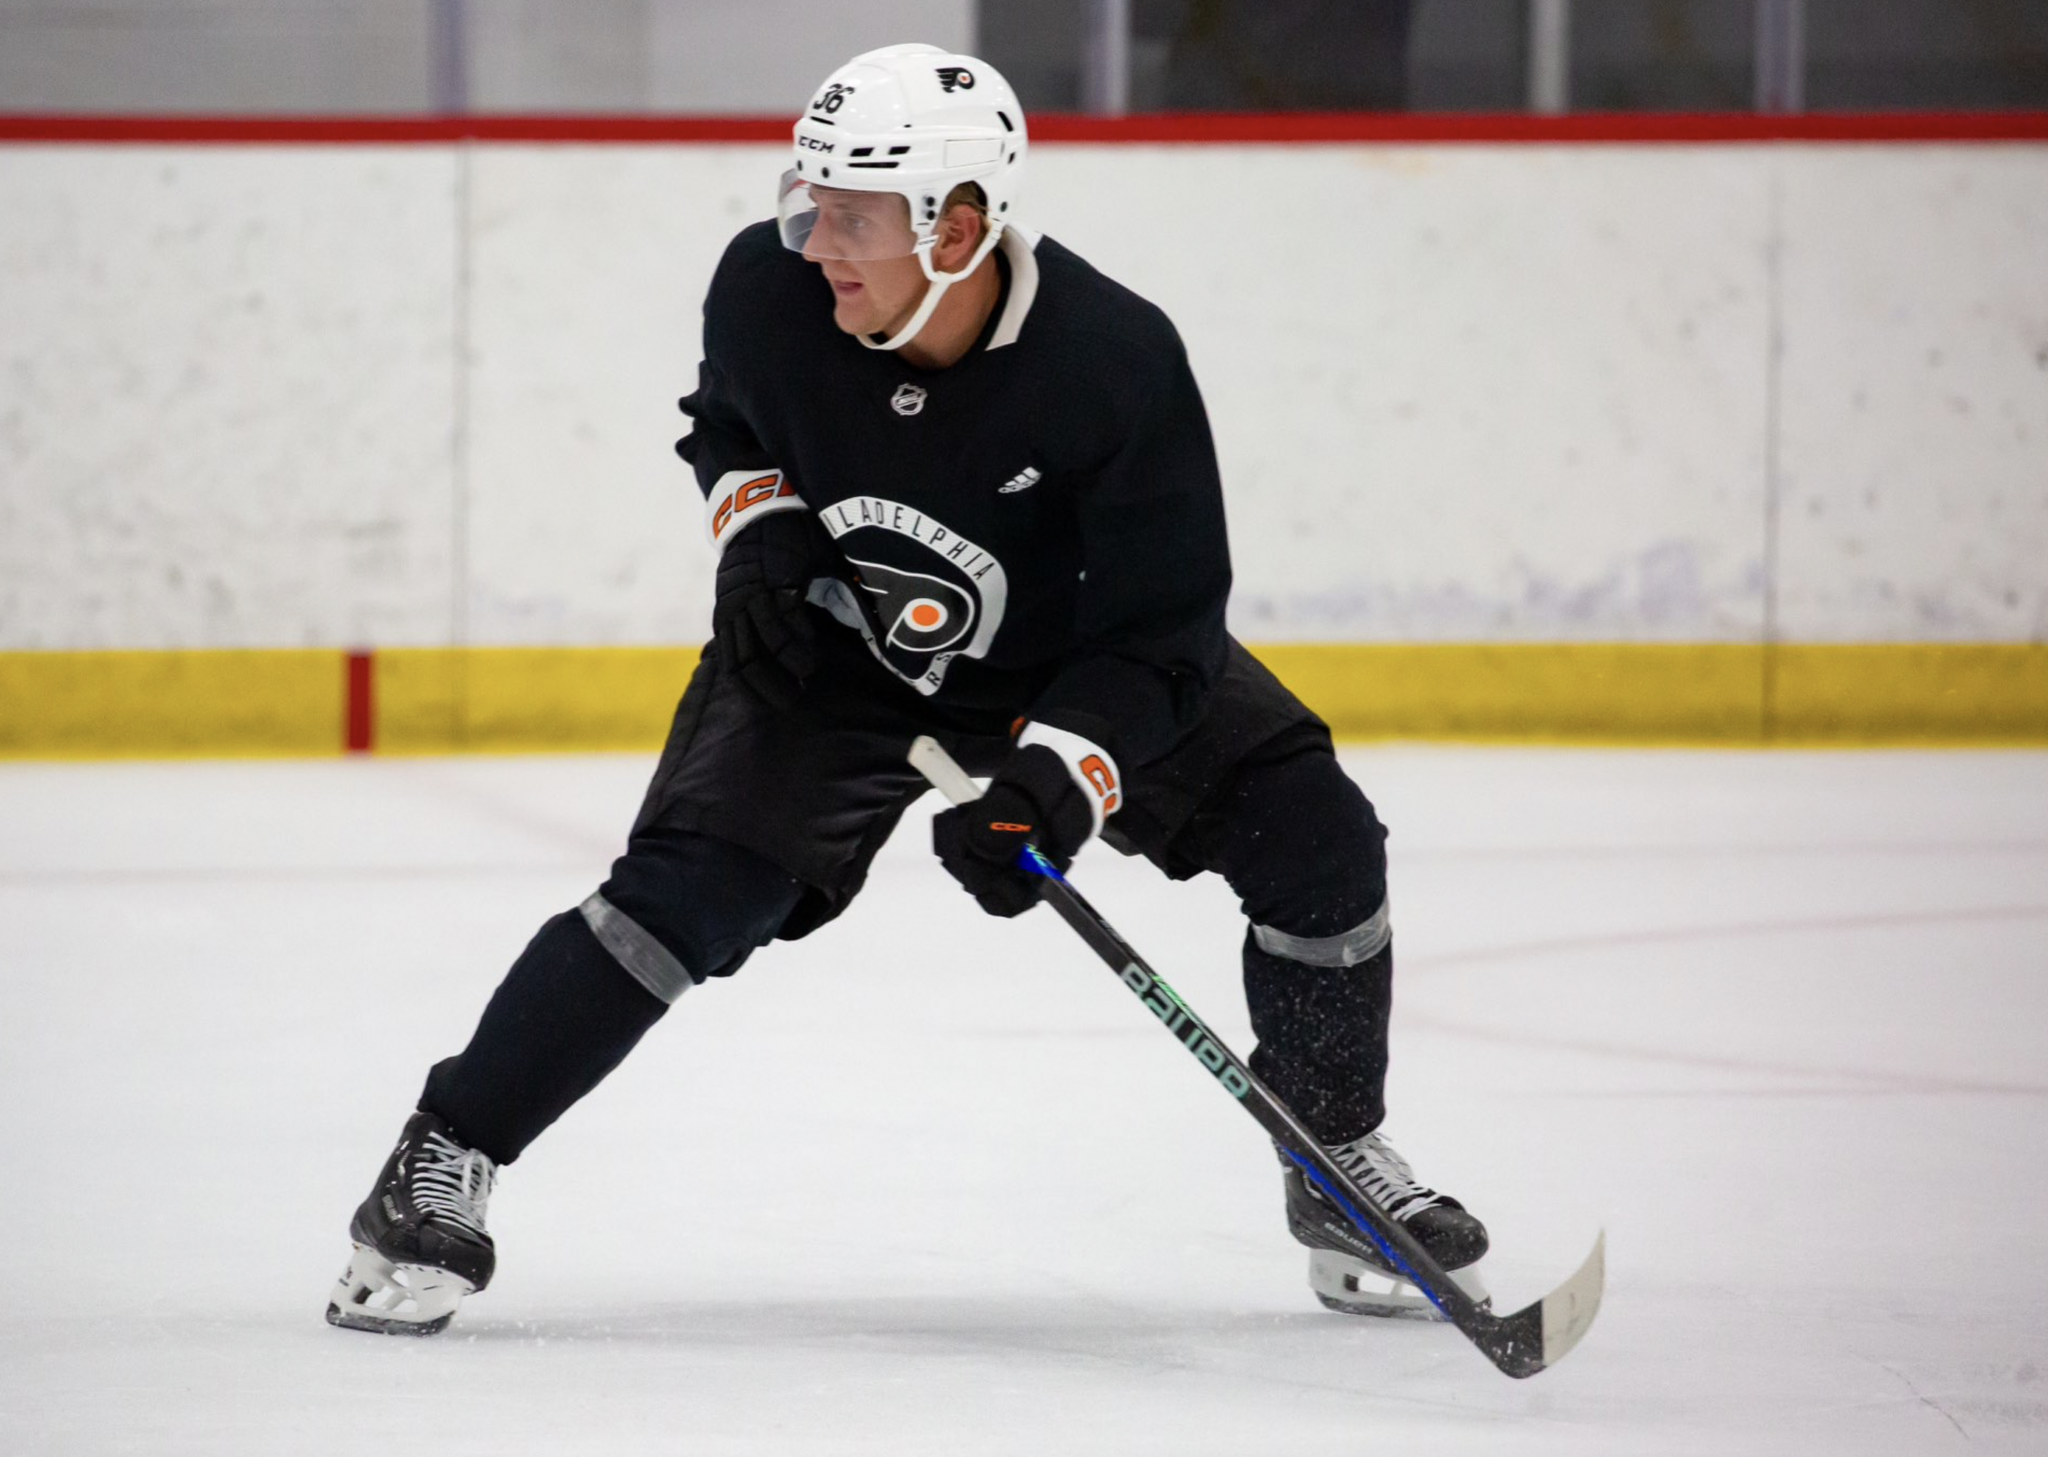 Family first' for Flyers' All-Star Briere in retirement